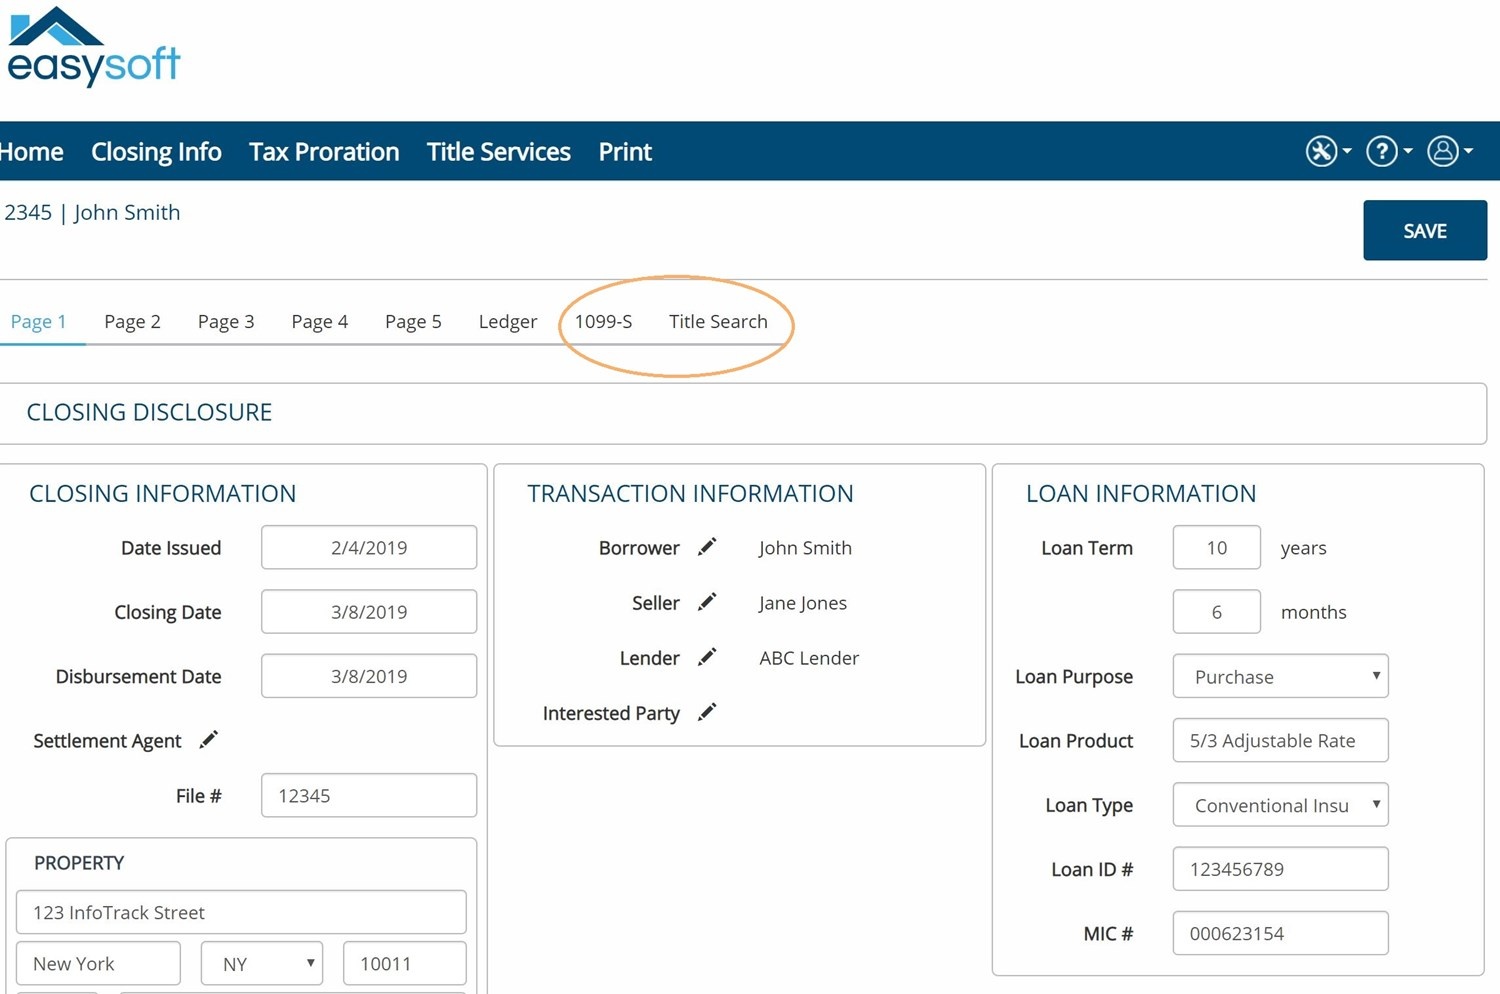 Easysoft users can use the InfoTrack integration to file real estate disclosure forms and search U.S. title records.